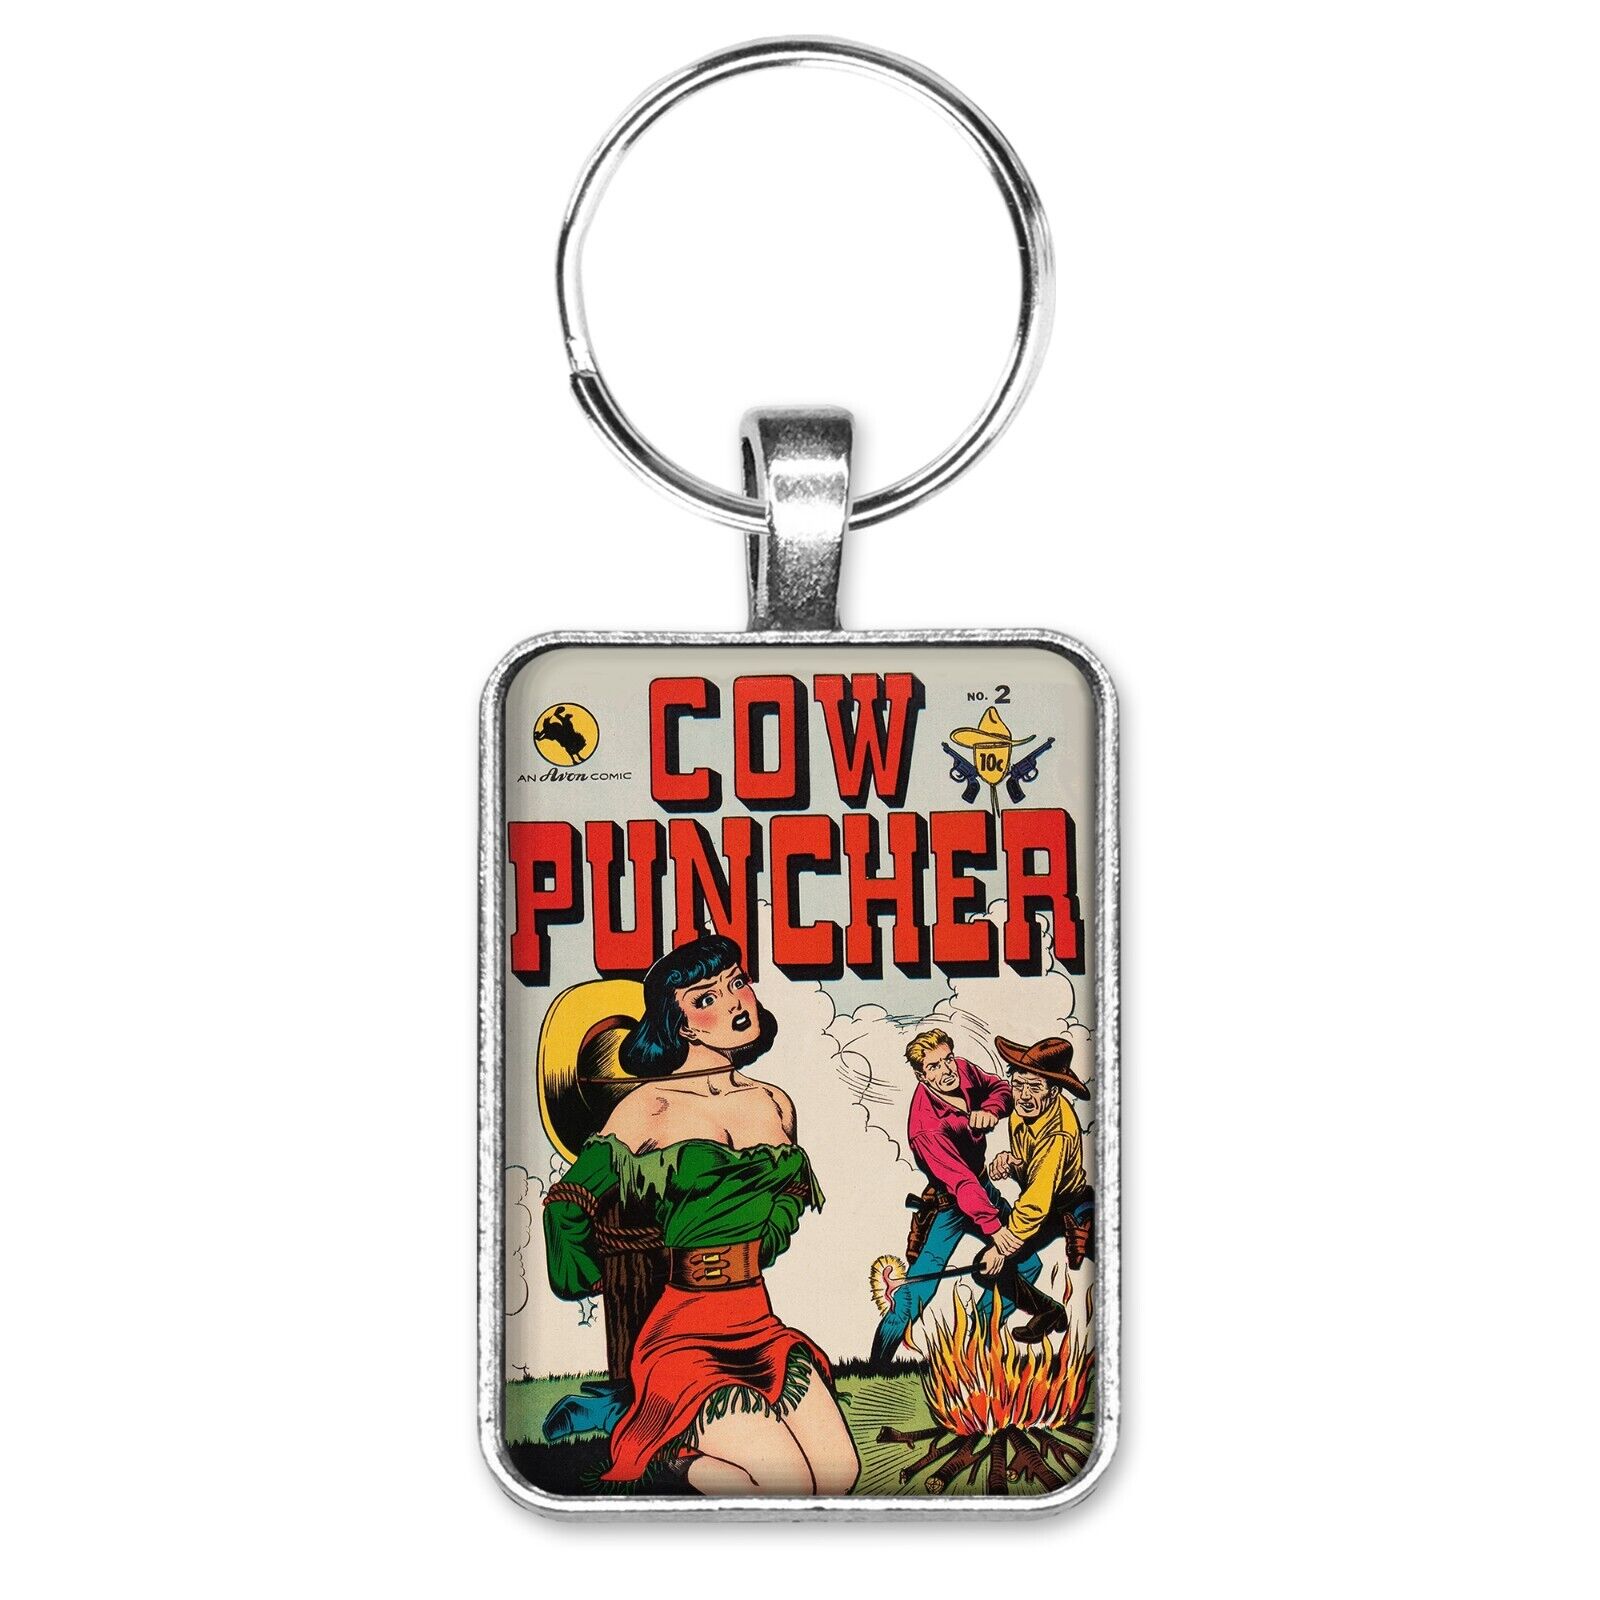 Cow Puncher Comics #2 Cover Key Ring or Necklace Classic Comic Book Jewelry